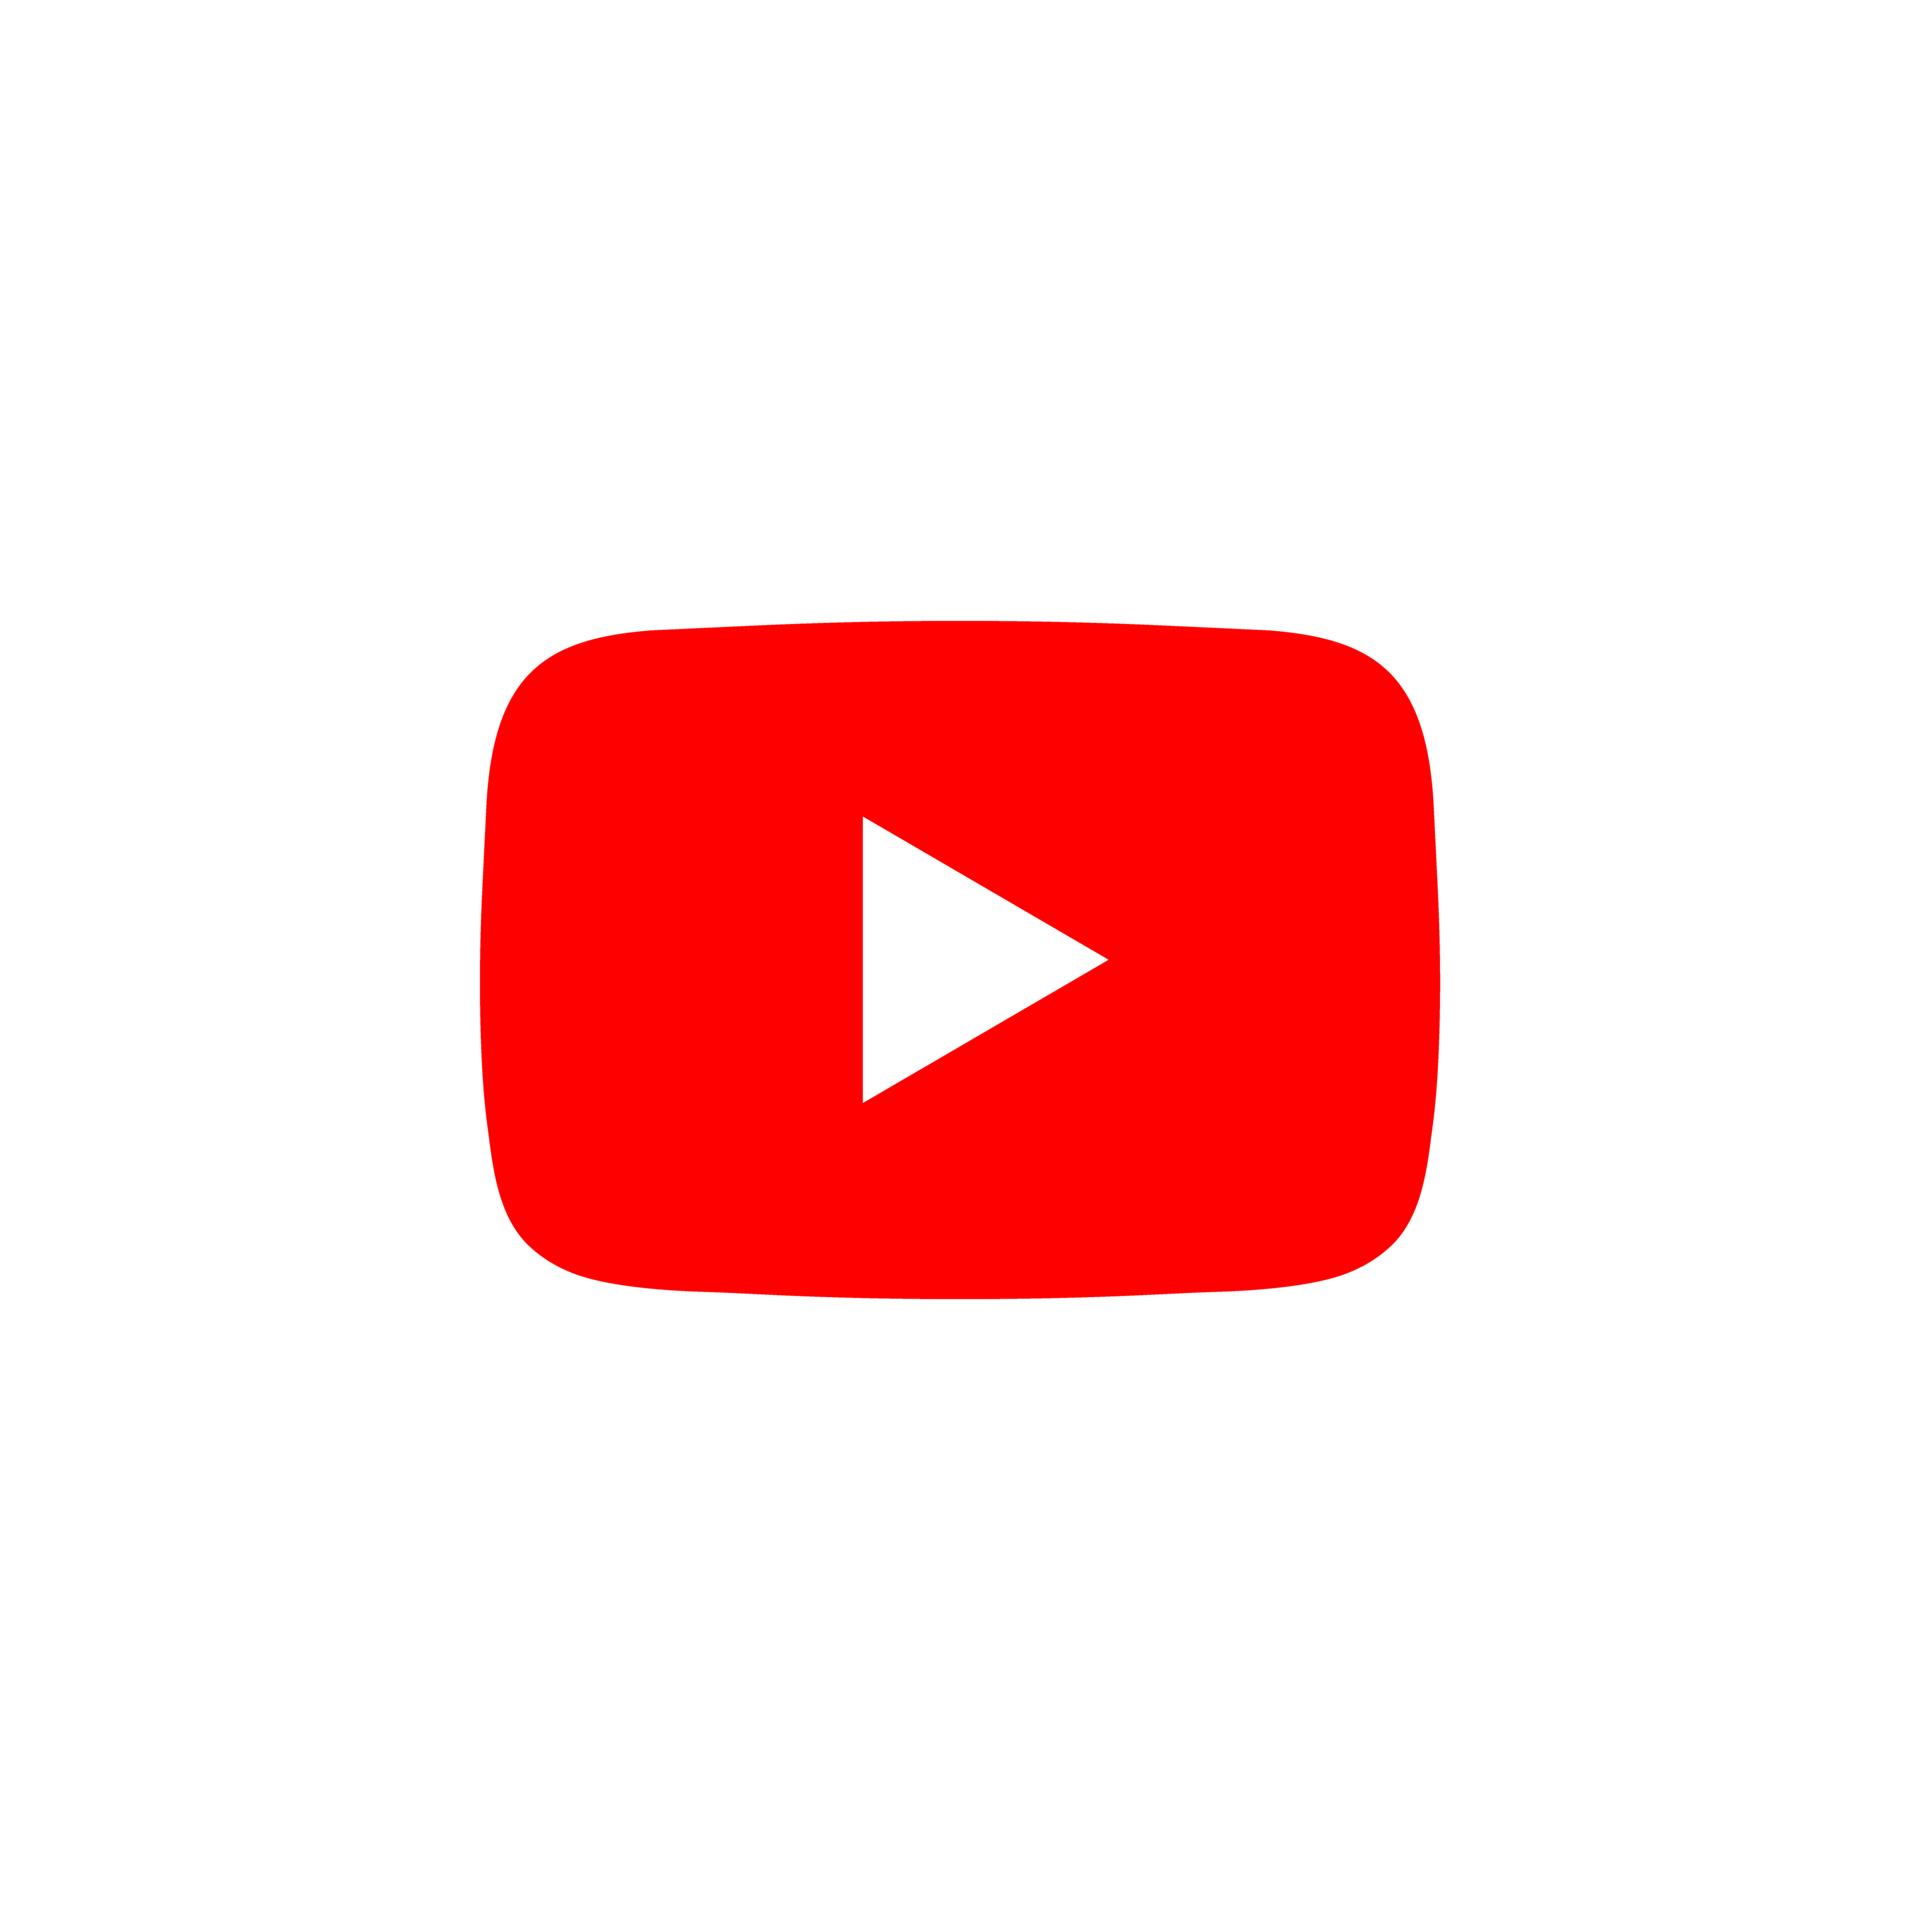 logo youtube png, icône youtube transparente 18930572 PNG